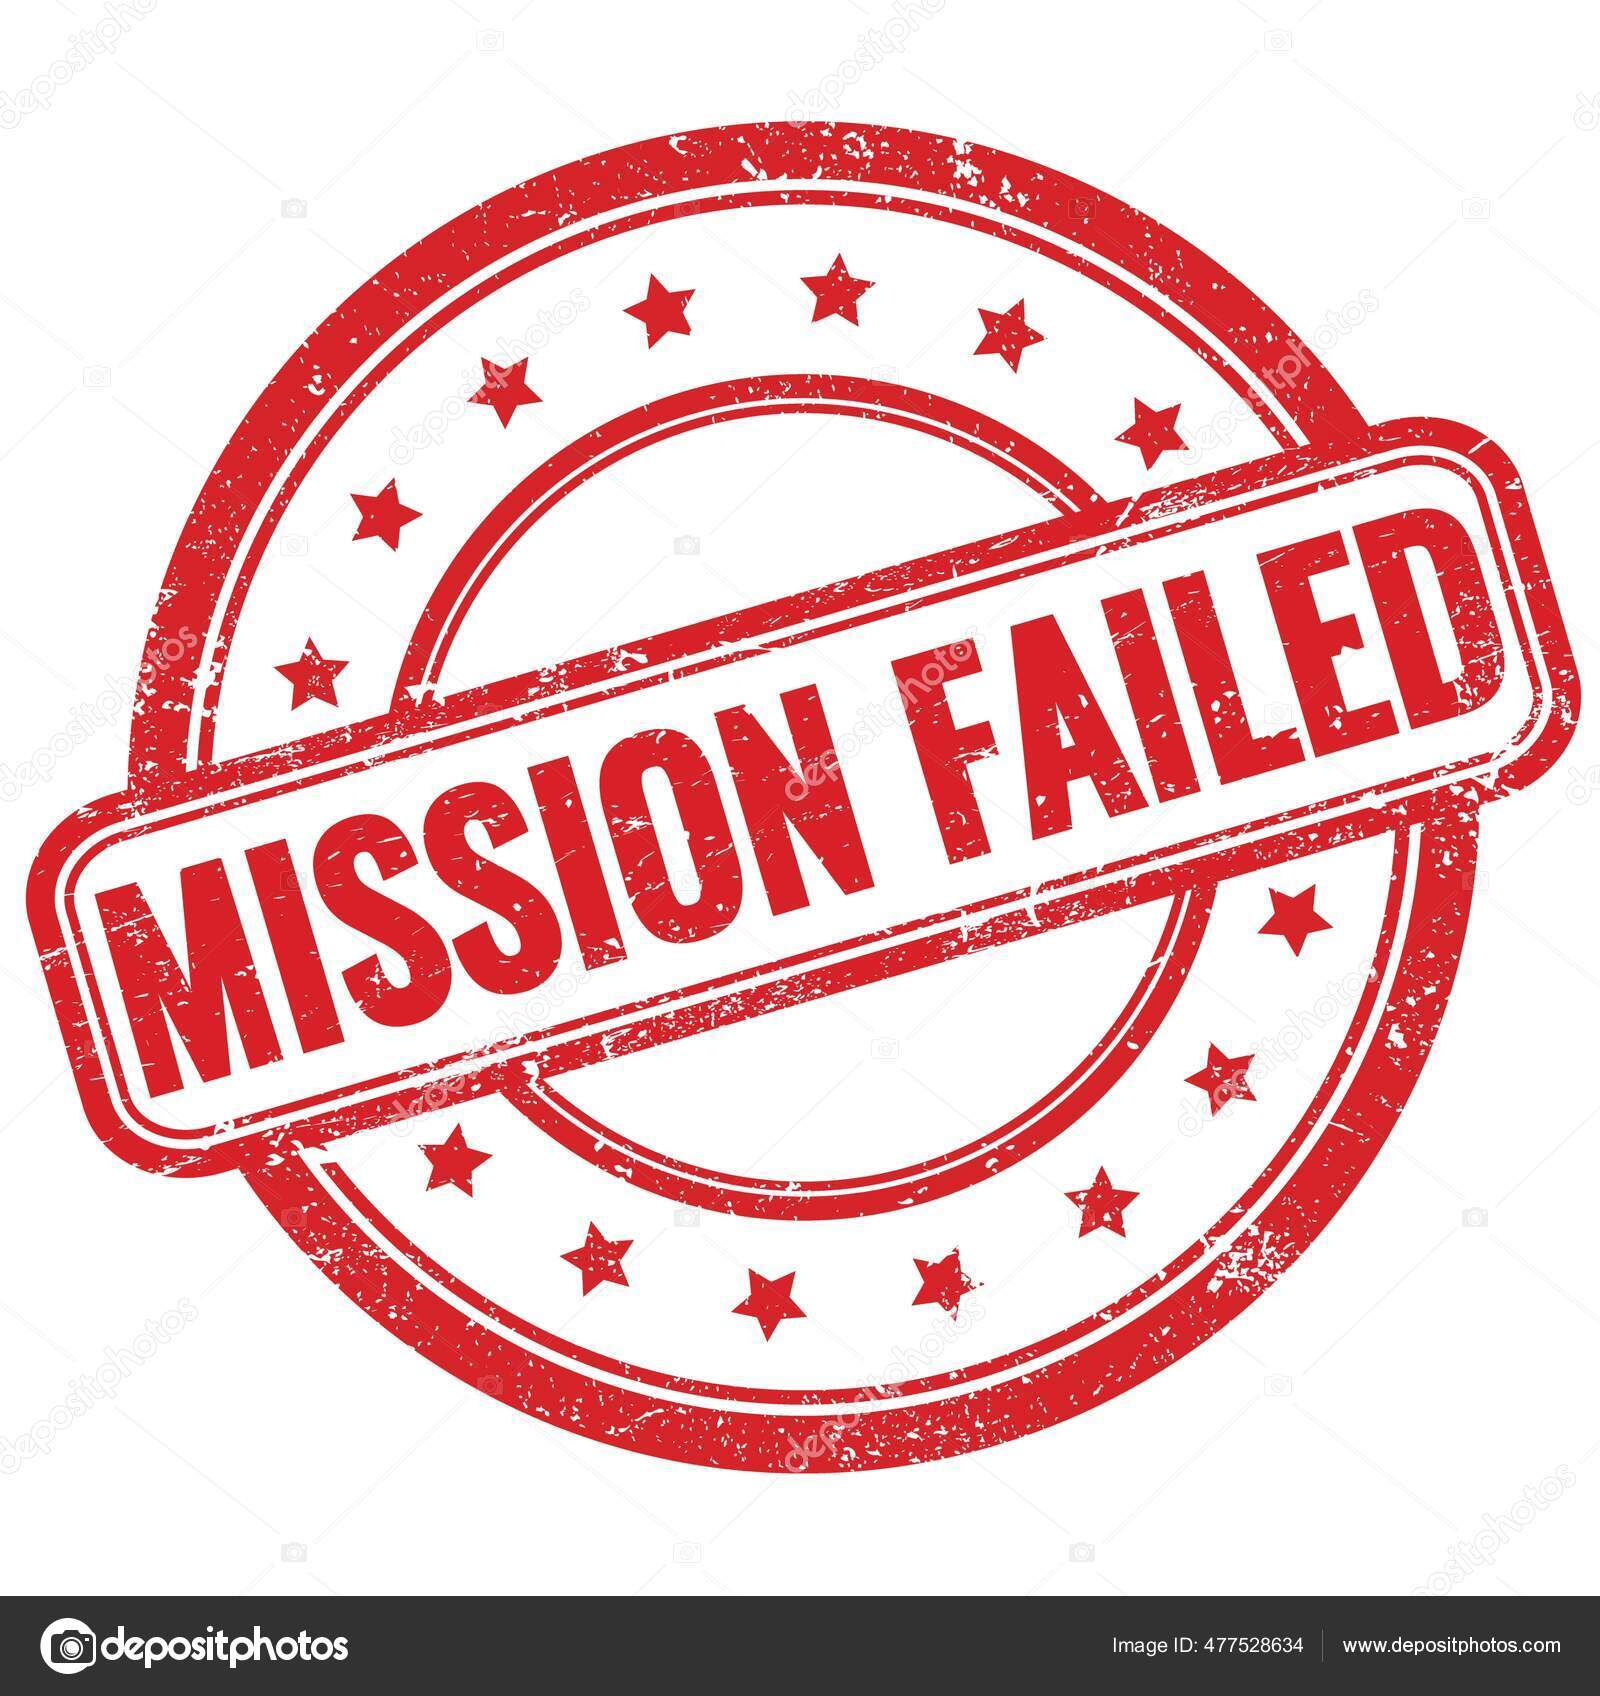 Mission Failed Text Red Vintage Grungy Rubber Stamp Stock Photo by ...